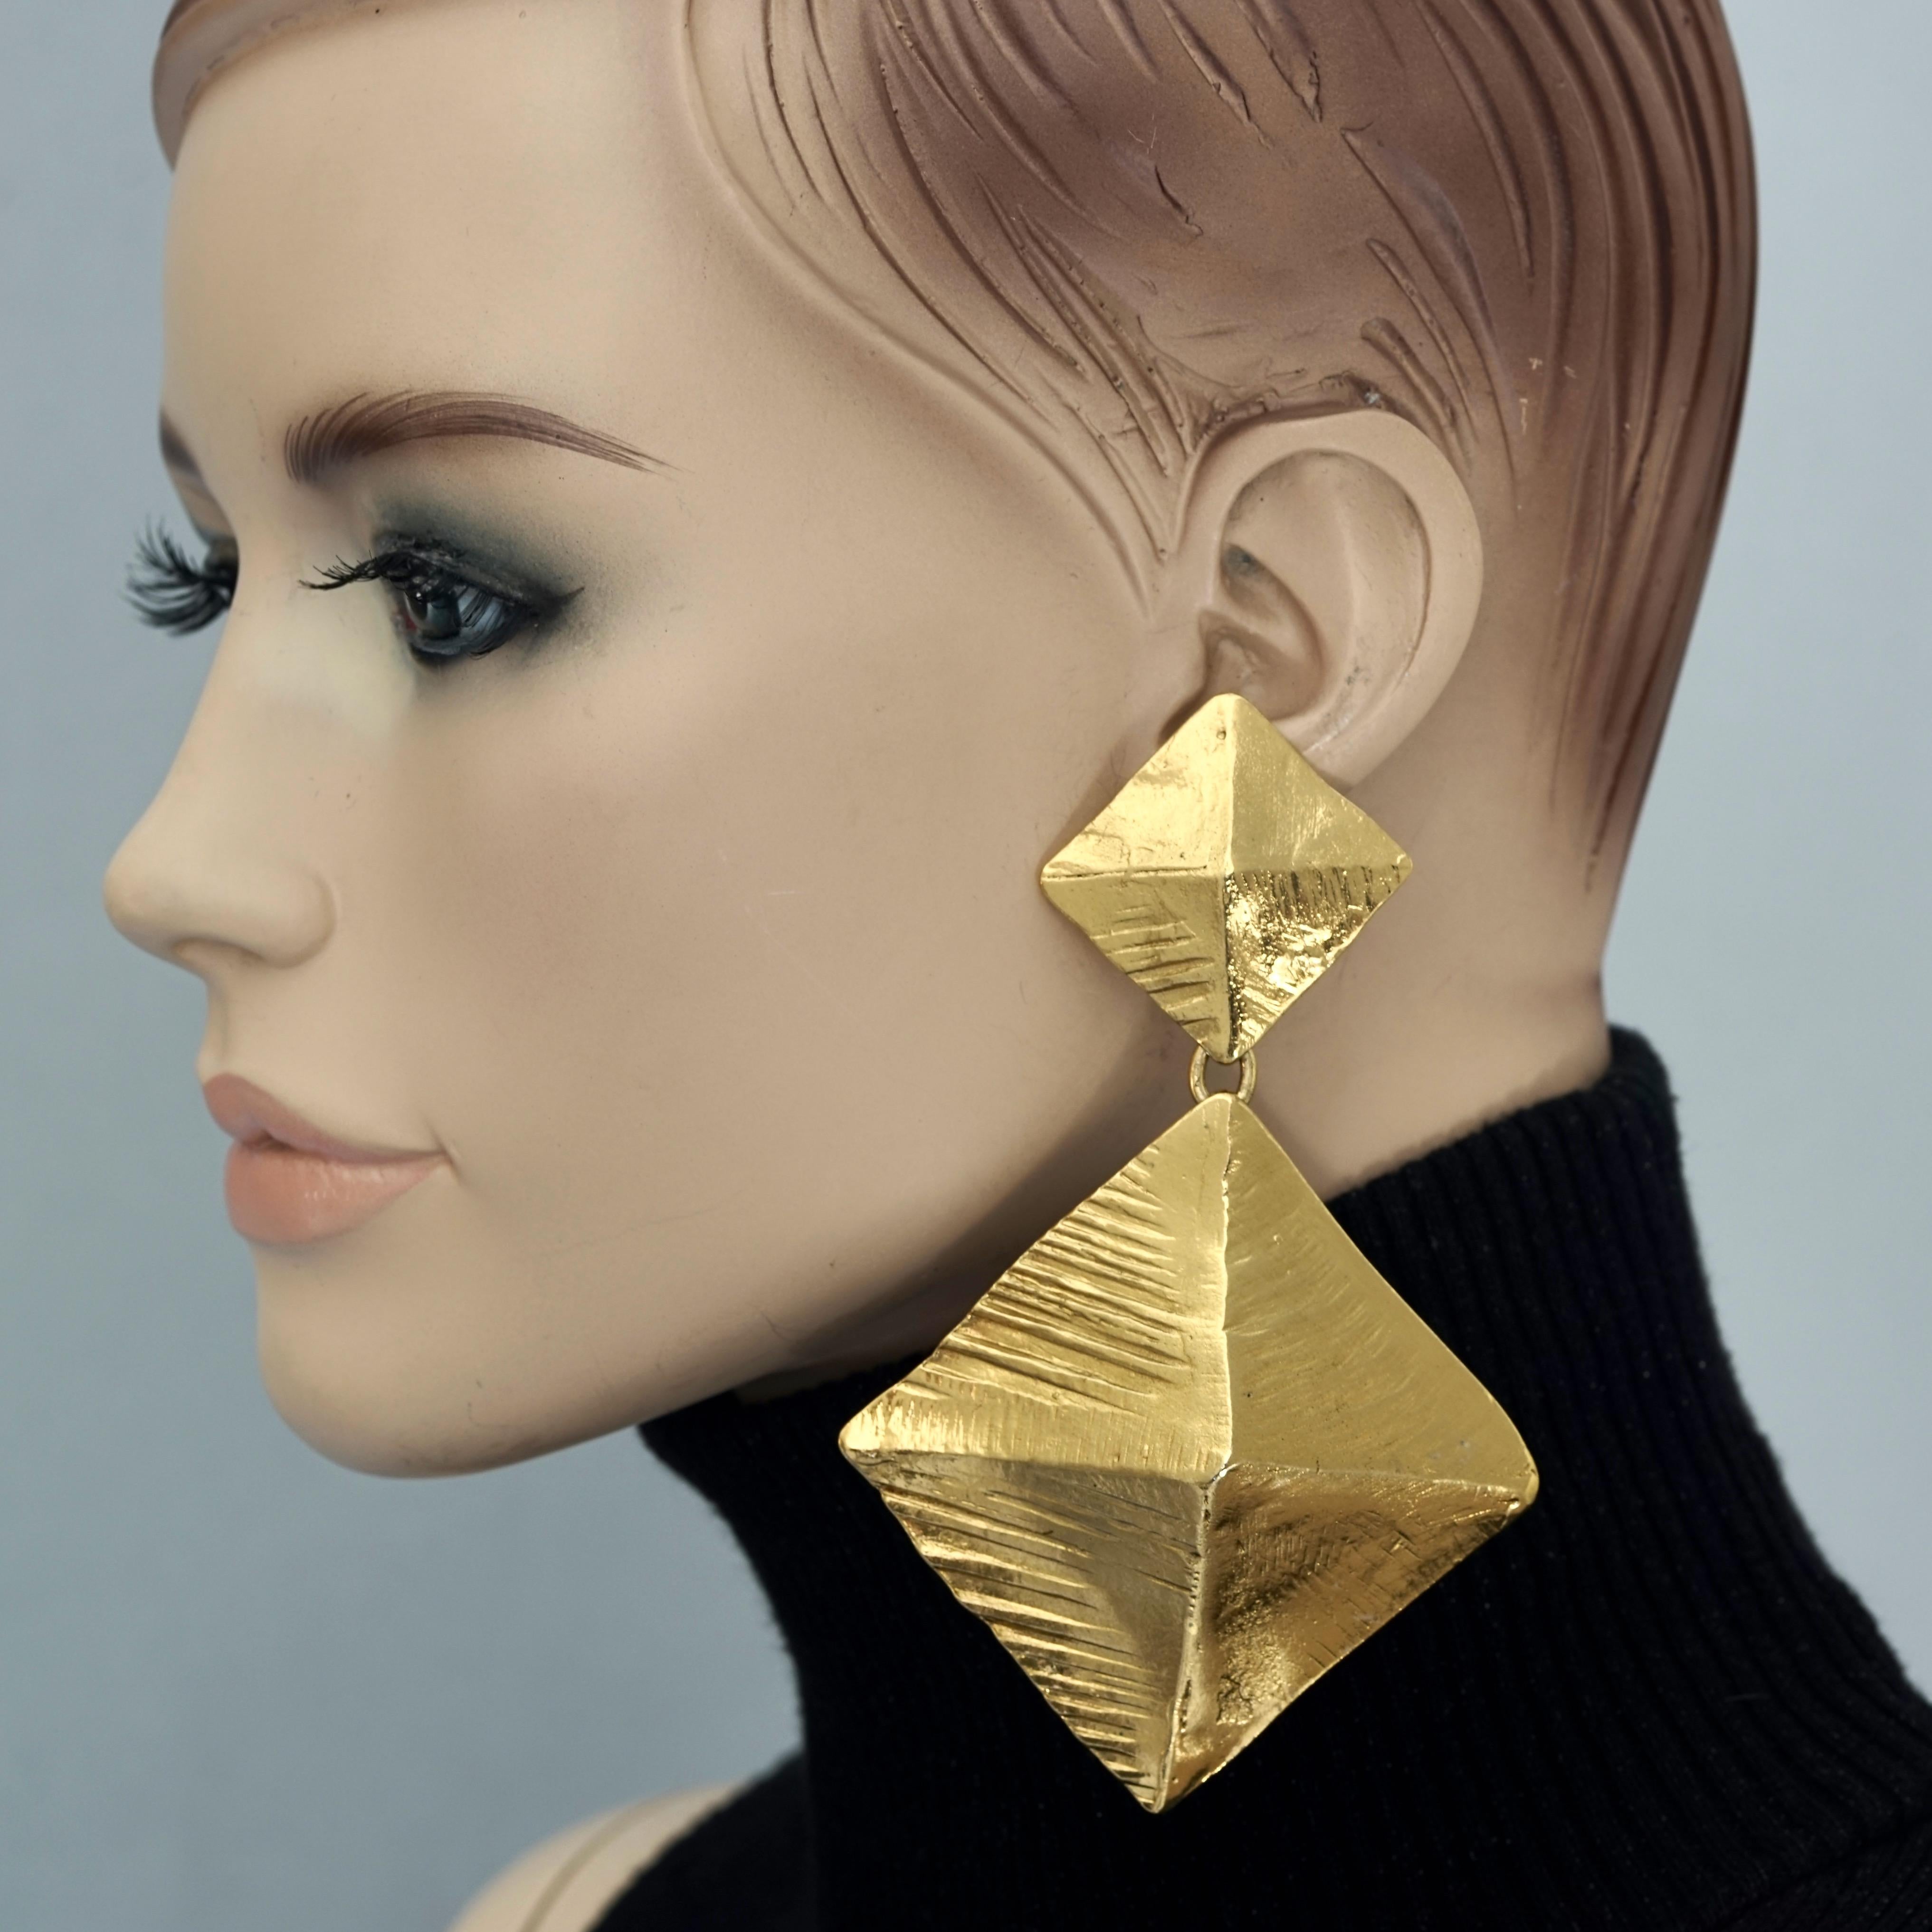 Vintage Massive YVES SAINT LAURENT Ysl Pyramid Dangling Earrings

Measurements:
Height: 4.52 inches (11.5 cm)
Width: 2.95 inches (7.5 cm)
Weight per Earring: 47 grams

Features:
- 100% Authentic YVES SAINT LAURENT.
- Massive textured double pyramid